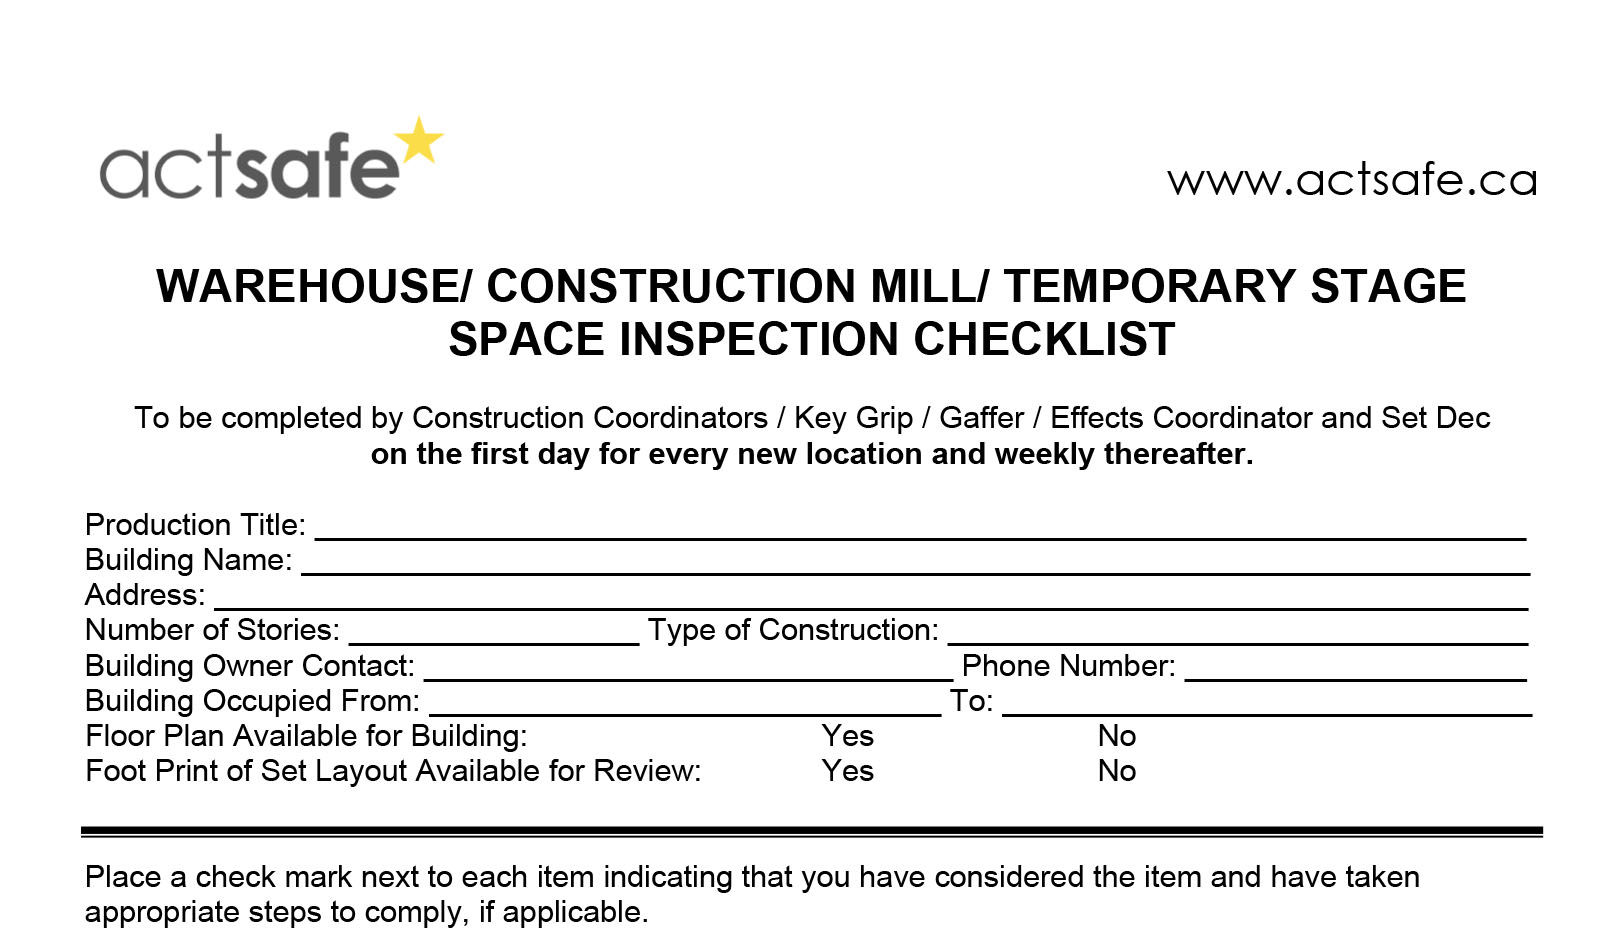 Warehouse/Construction Mill/Temporary Stage Space Inspection Checklist